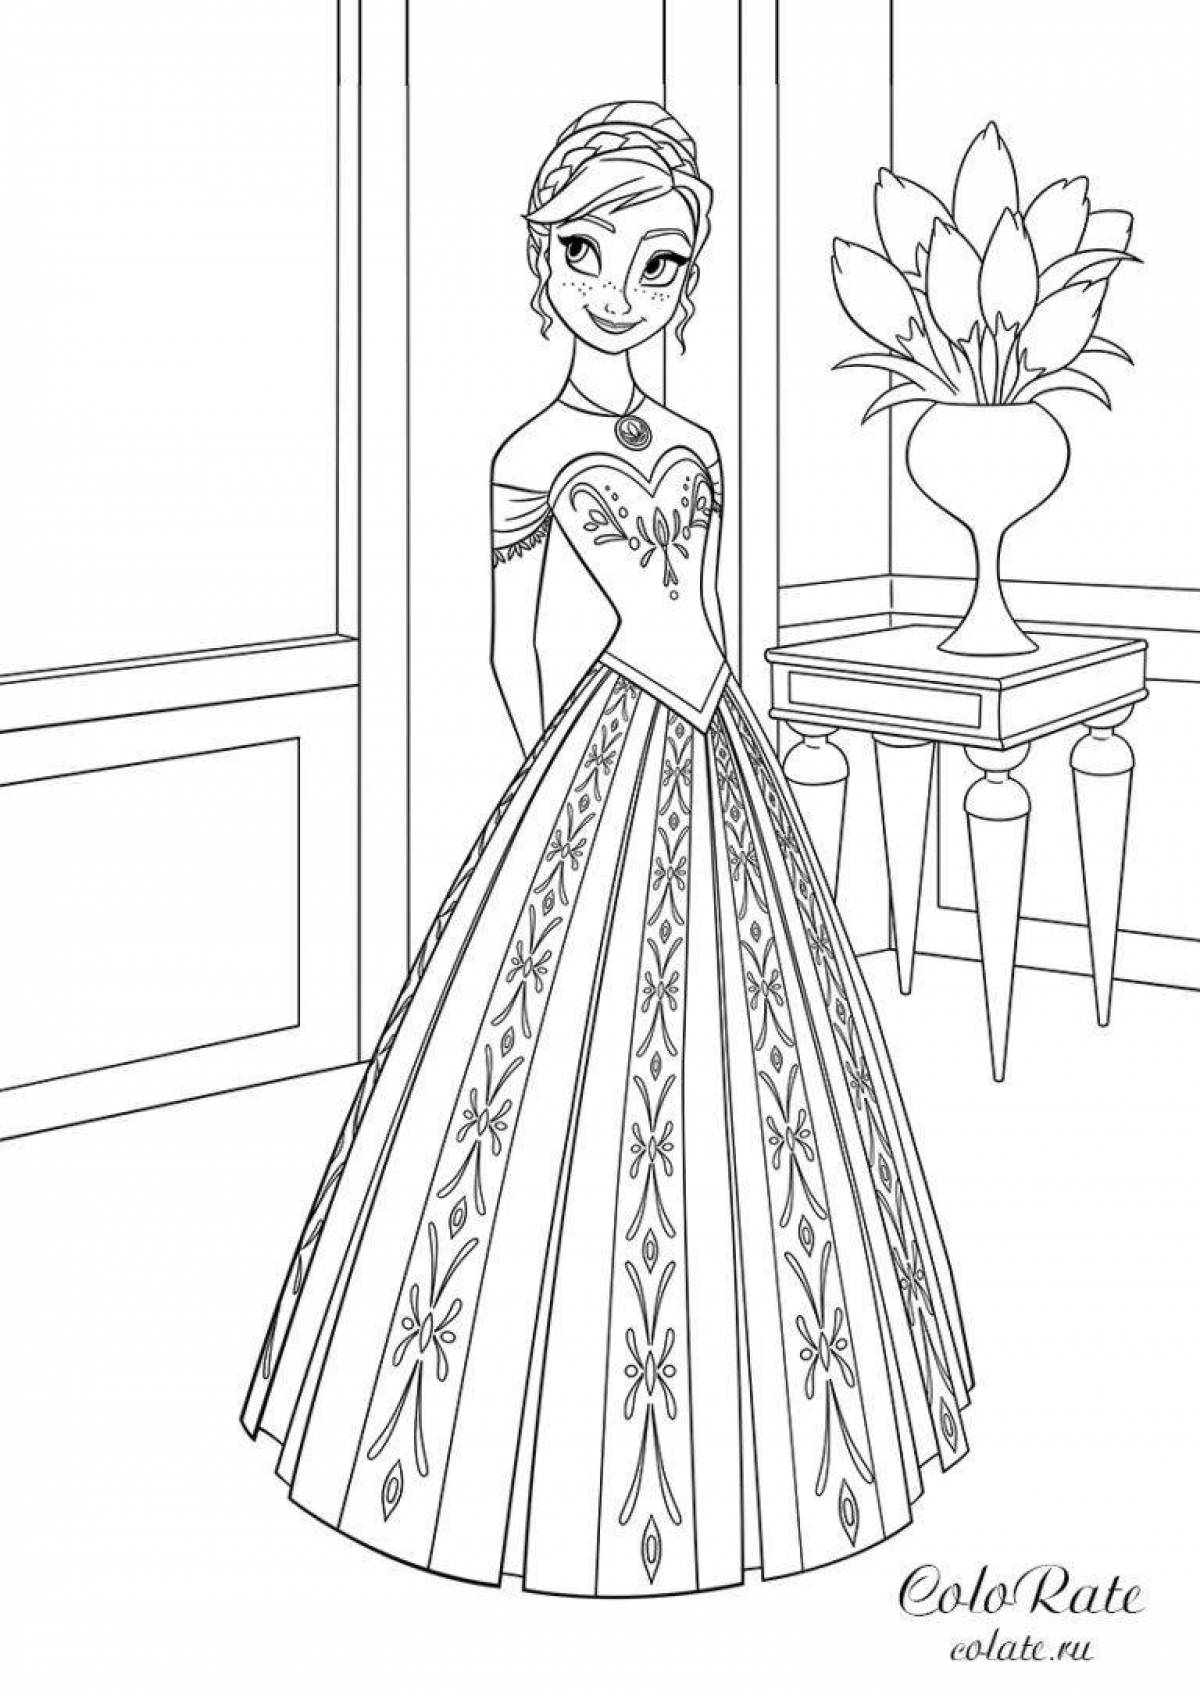 Elsa glamor coloring with clothes